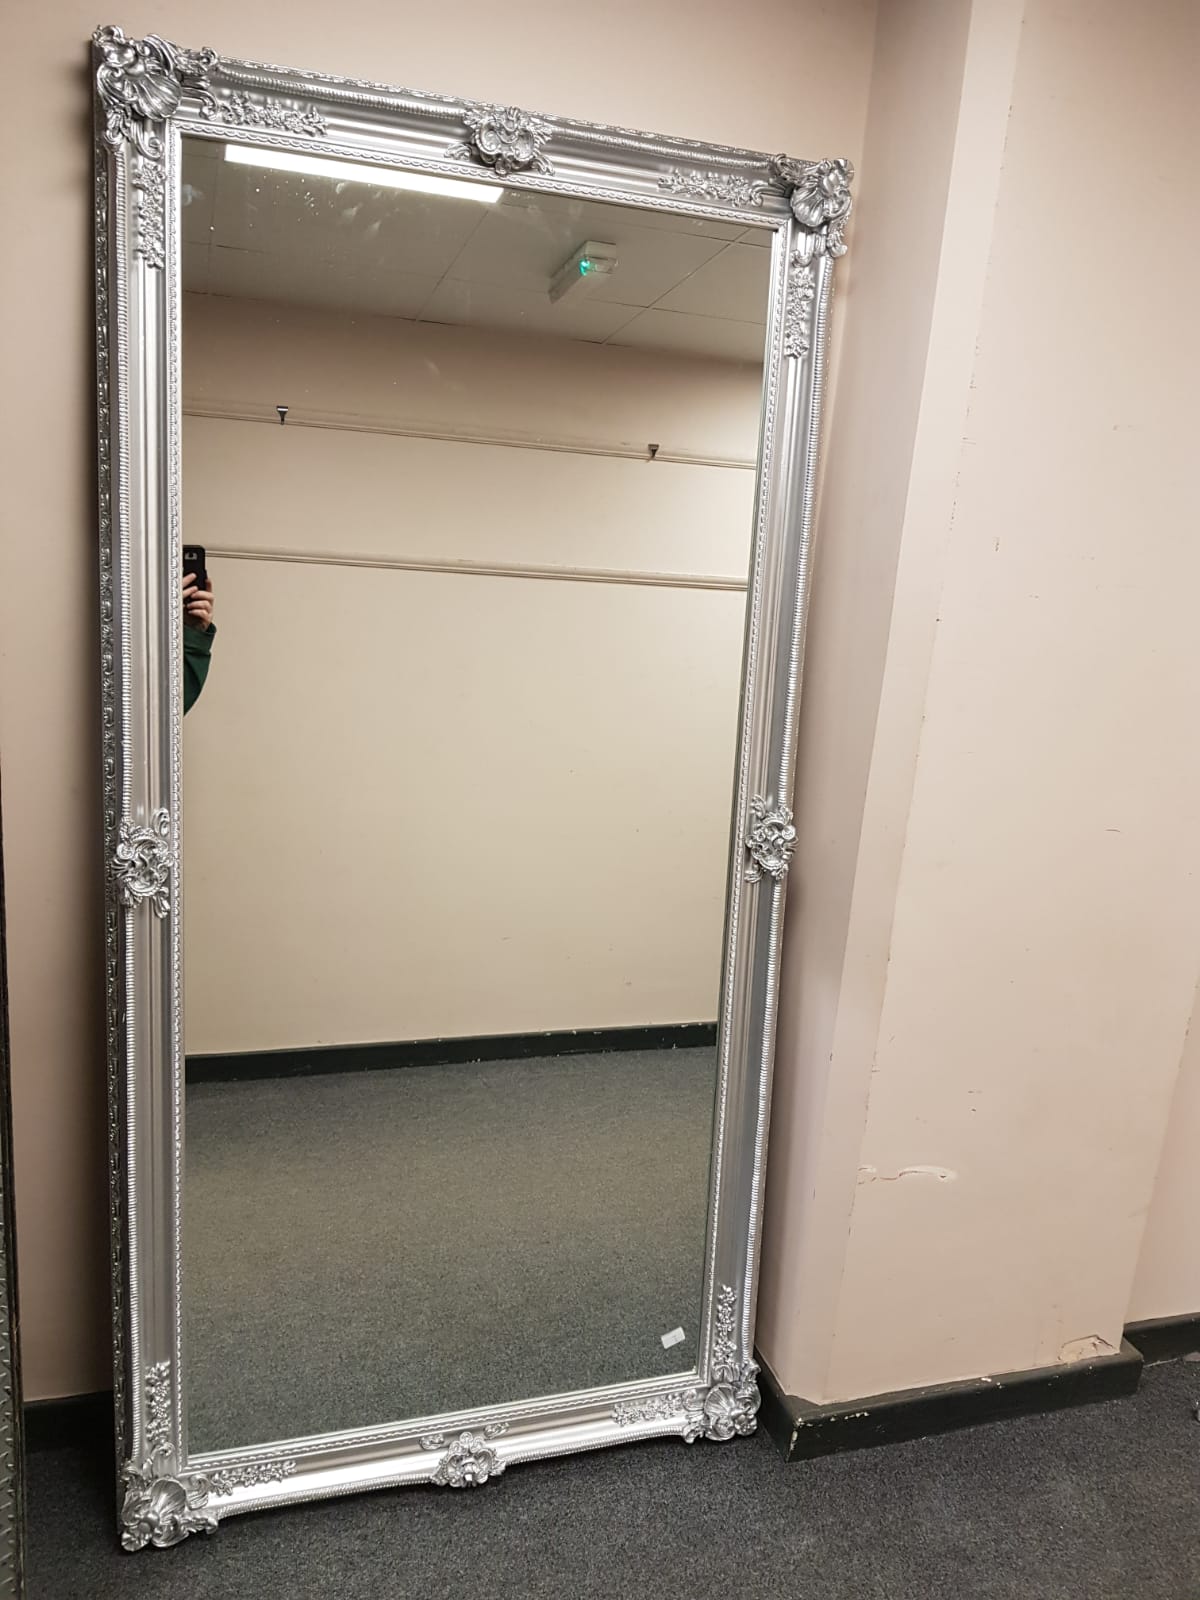 A chrome framed leaning mirror,